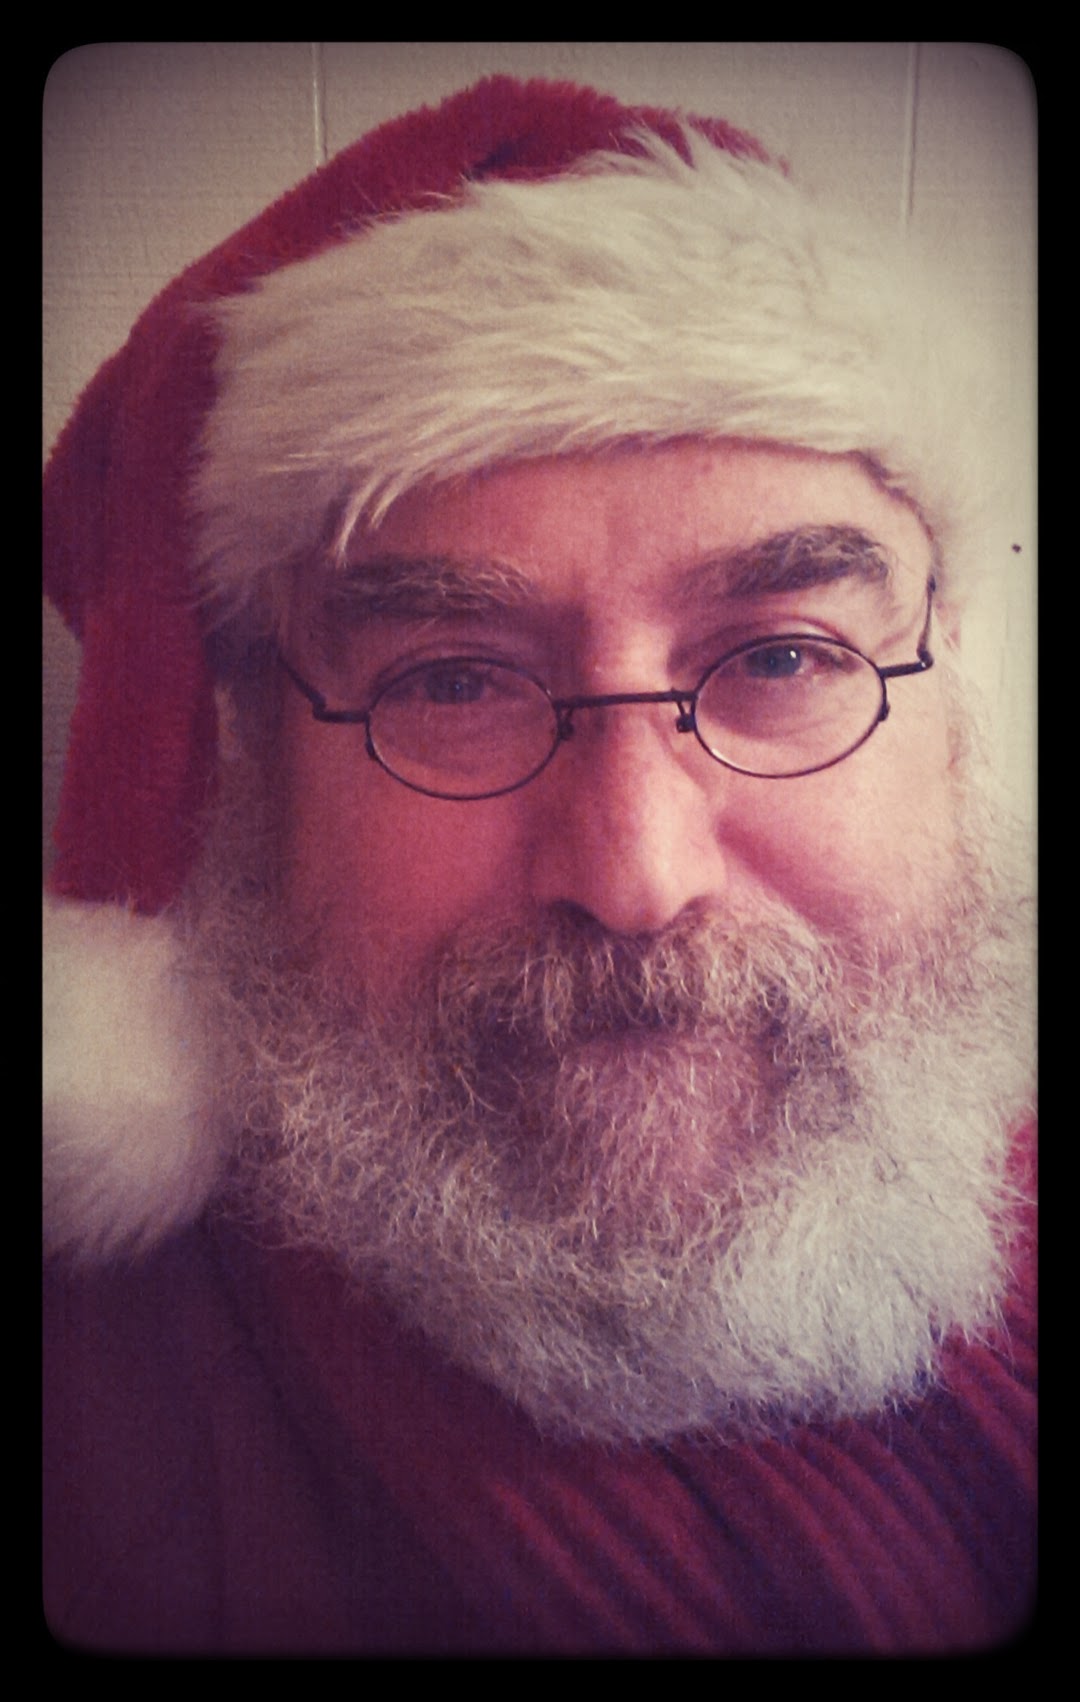 Me as Santa, and yes, that's my real beard and working glasses. I love working with kids!